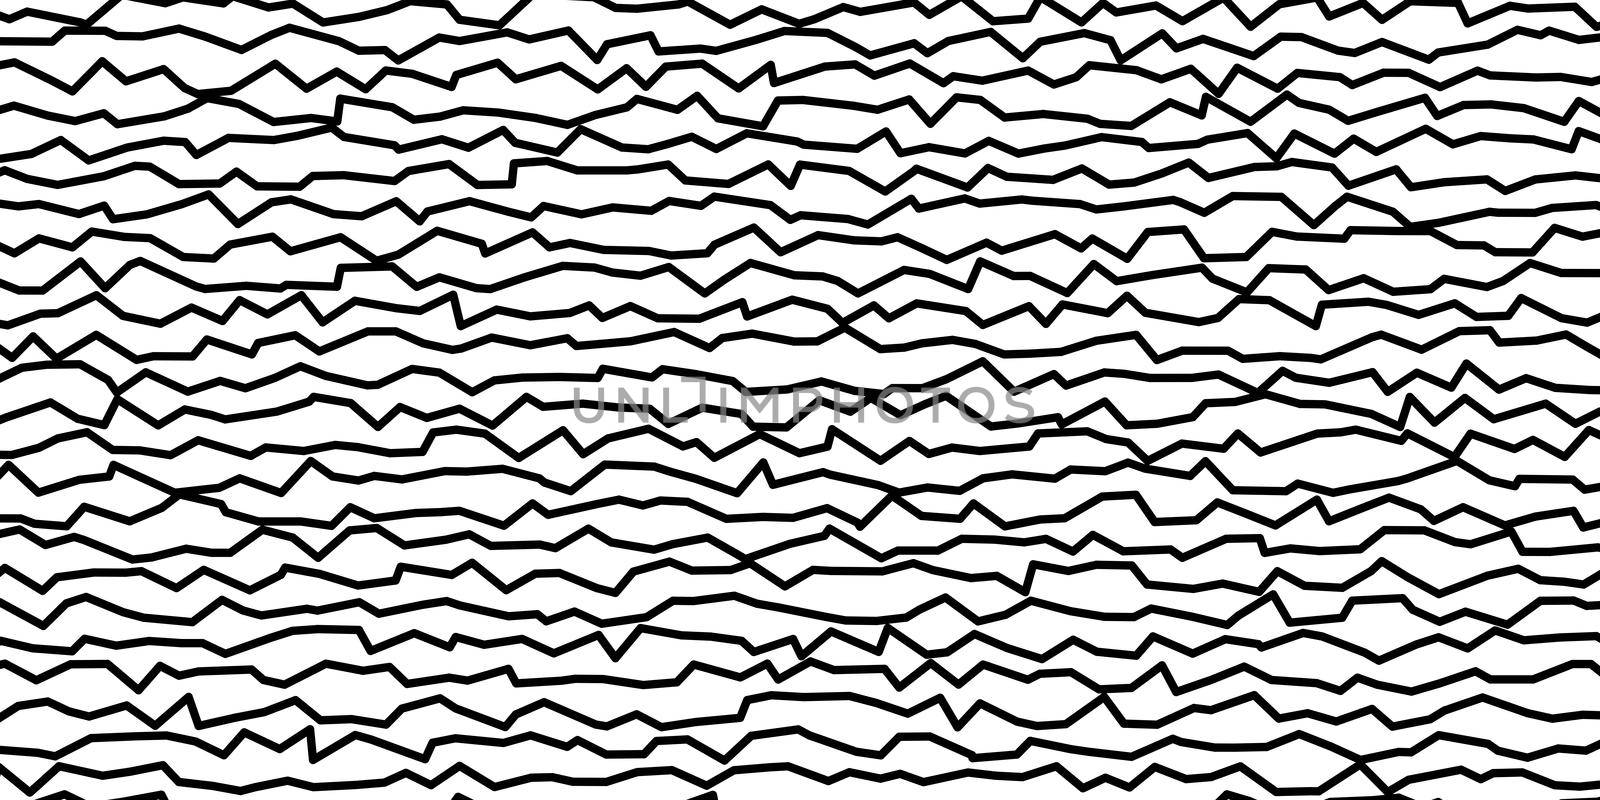 Jagged black lines on white background illustration by dutourdumonde